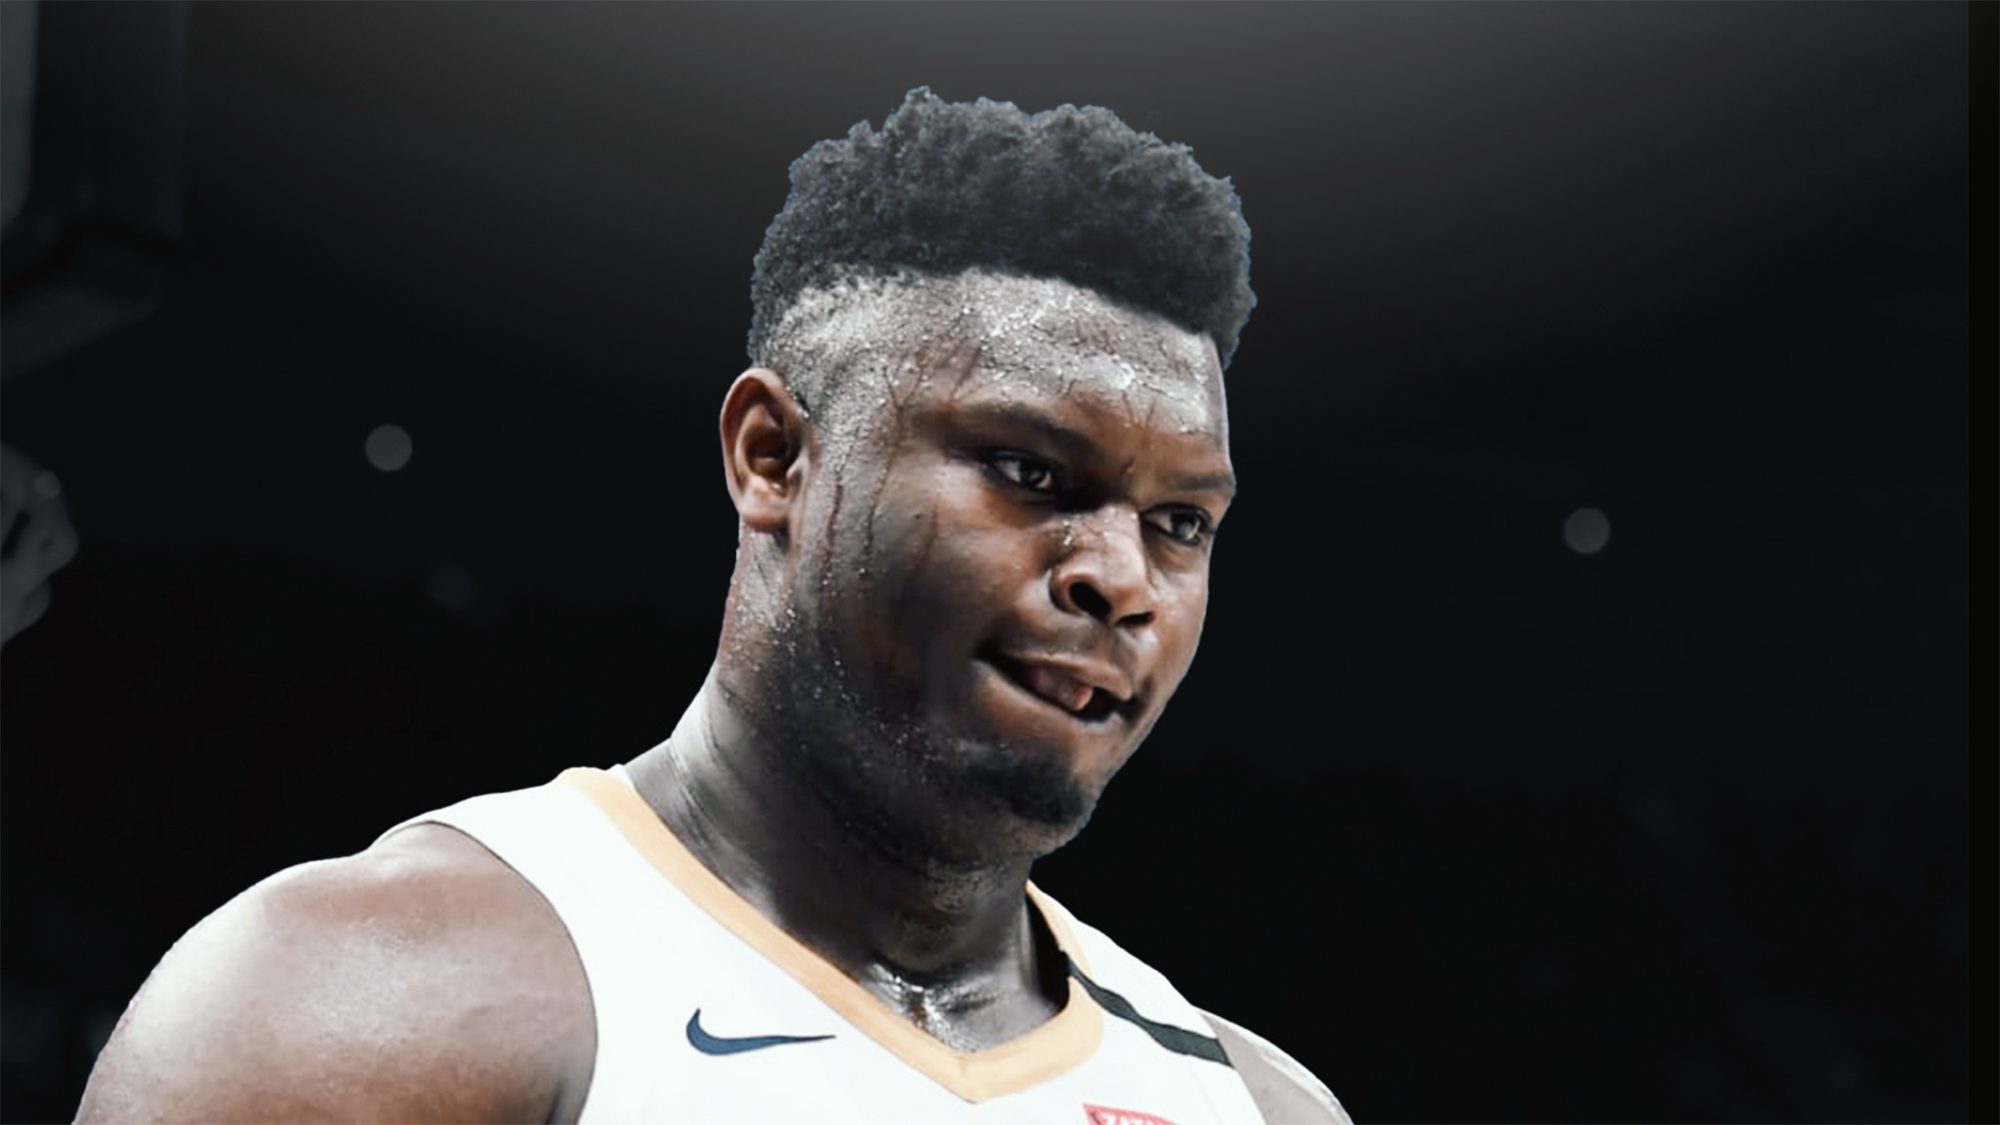 Concerning Updates Emerge About Zion Williamson’s Health